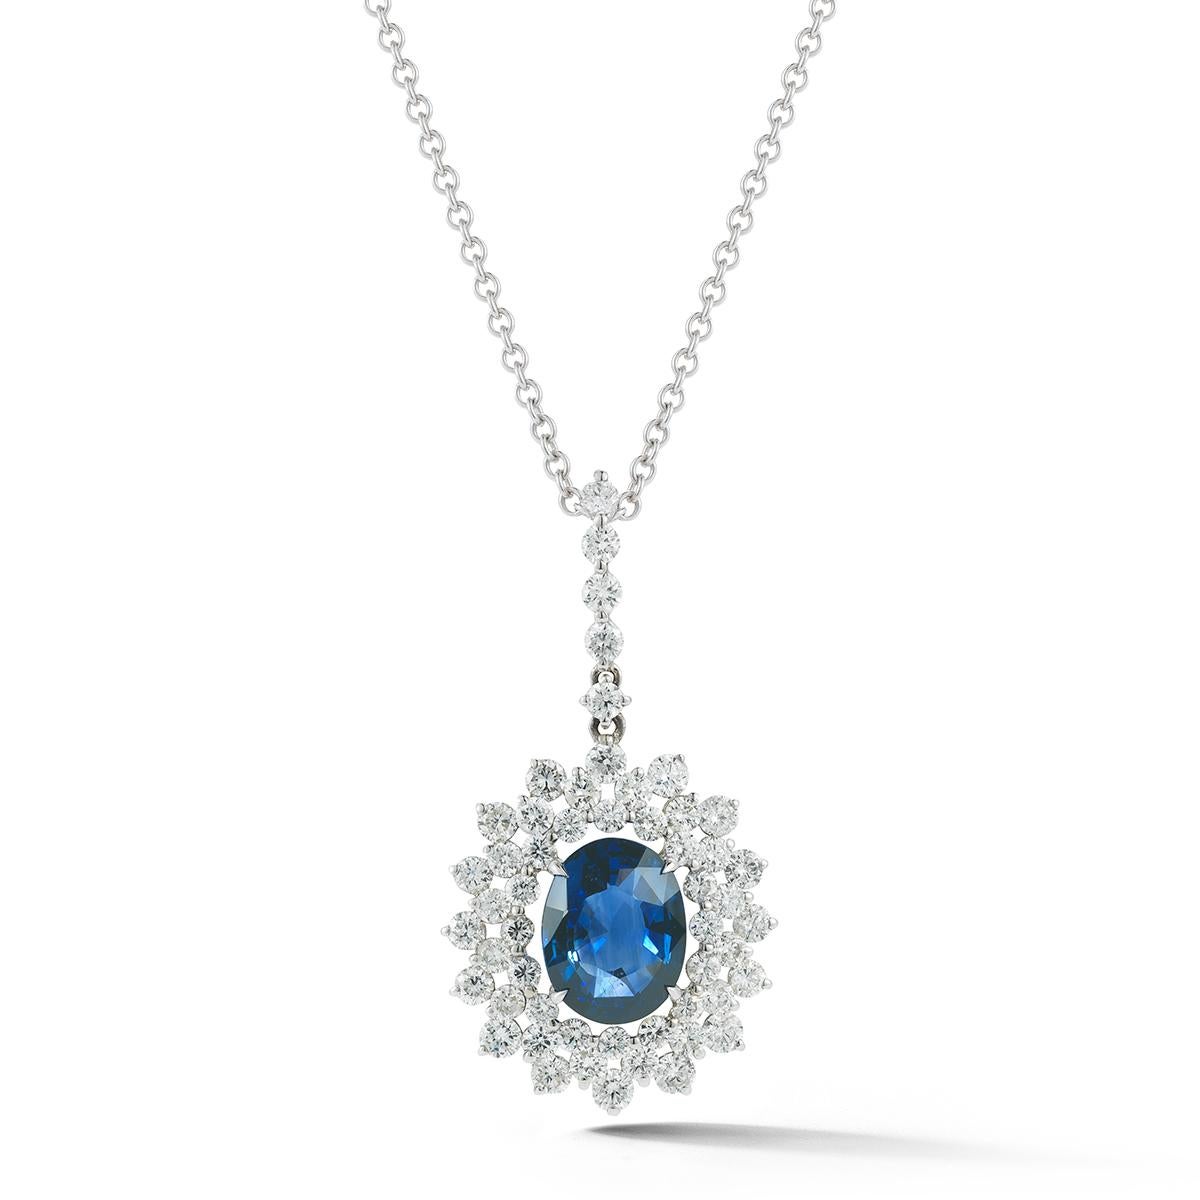 SAPPHIRE AND DIAMOND PENDANT
A classic oval sapphire pendant dangles from a delicate chain.
Item:	# 02677
Metal:	18k W
Color Weight:	3.15 ct.
Diamond Weight:	2.06 ct.